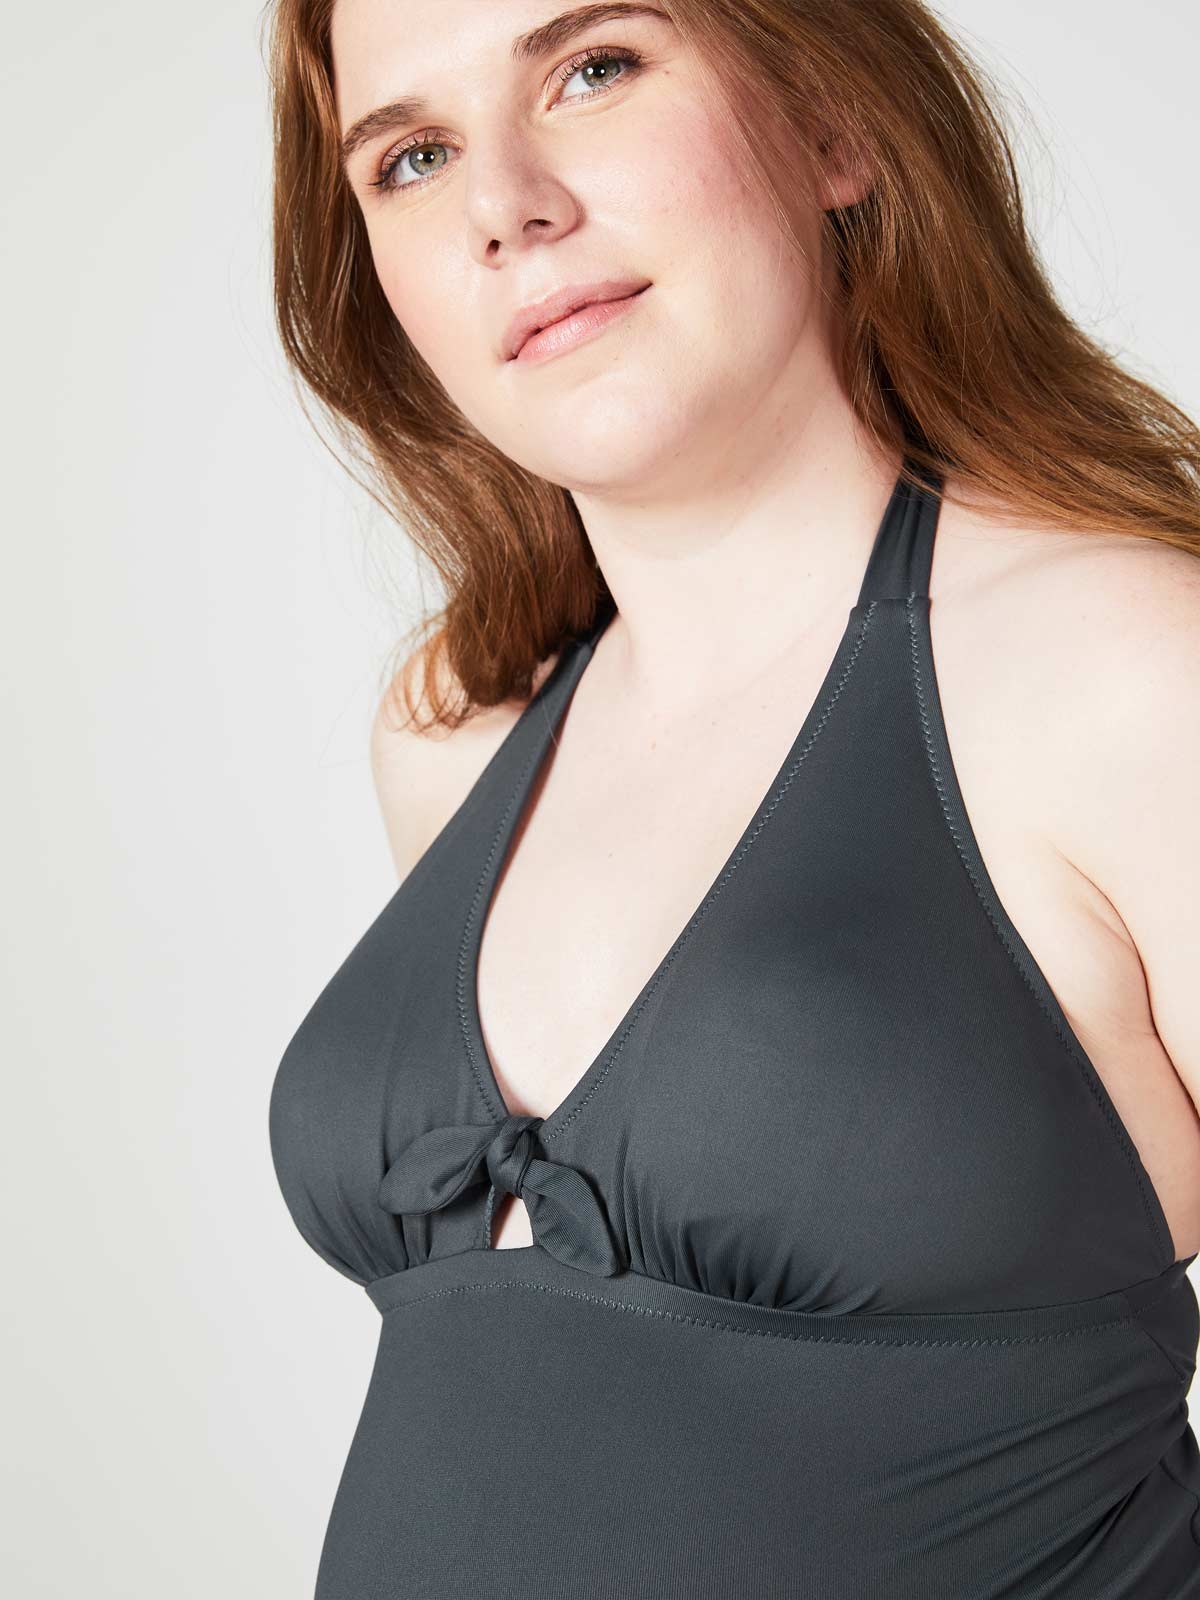 Sexy Maternity Swimsuit Tu For Pregnant Women Suspender Swim Suit In Plus  Size 2023 Collection T2306 From Babiq03, $5.39